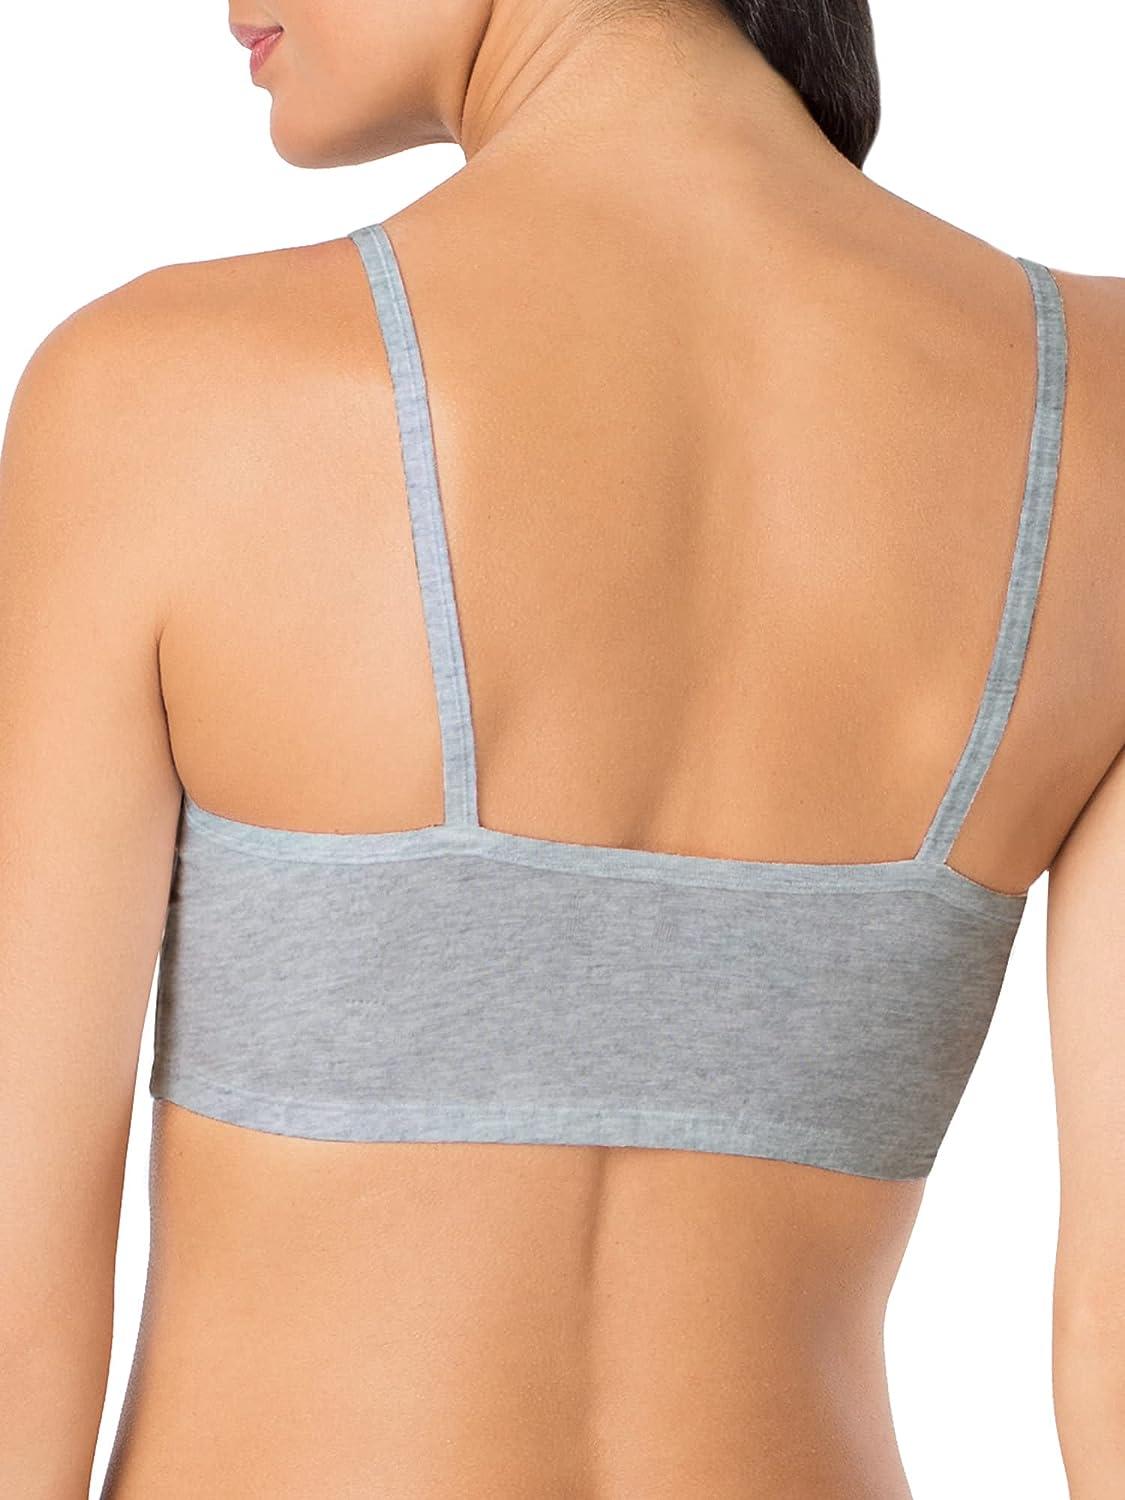 Fruit of The Loom Womens Spaghetti Strap Cotton Pull Over 3 Pack Sports Bra,  Charcoal Heather/White/Isazure, 36 in Dubai - UAE